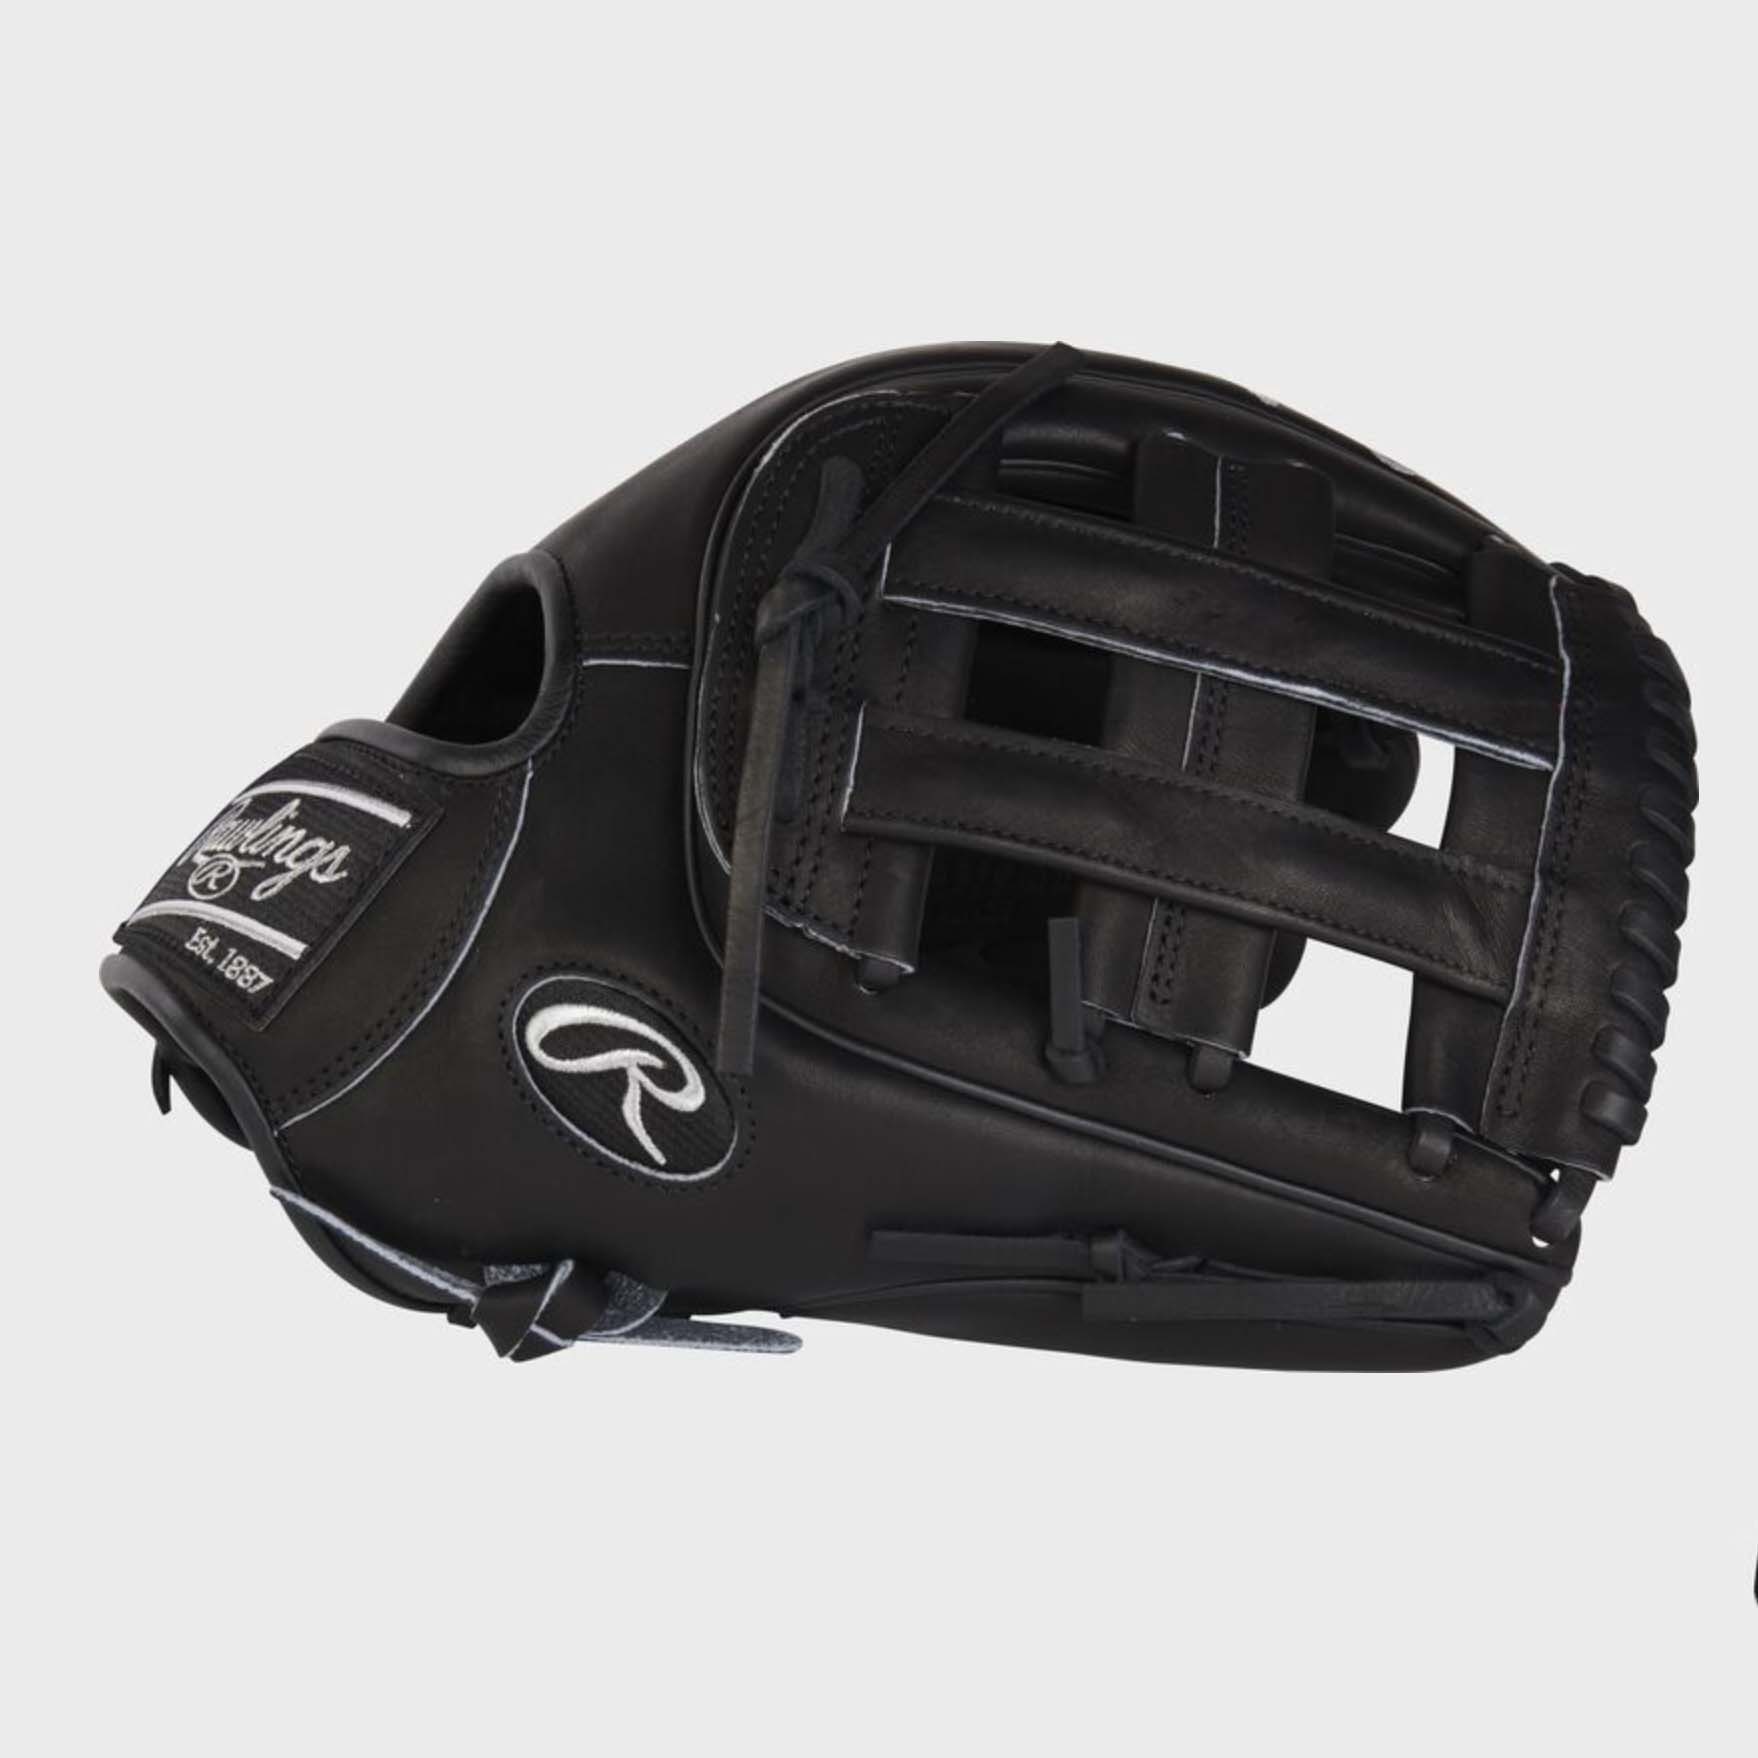 Rawlings outfield glove in black